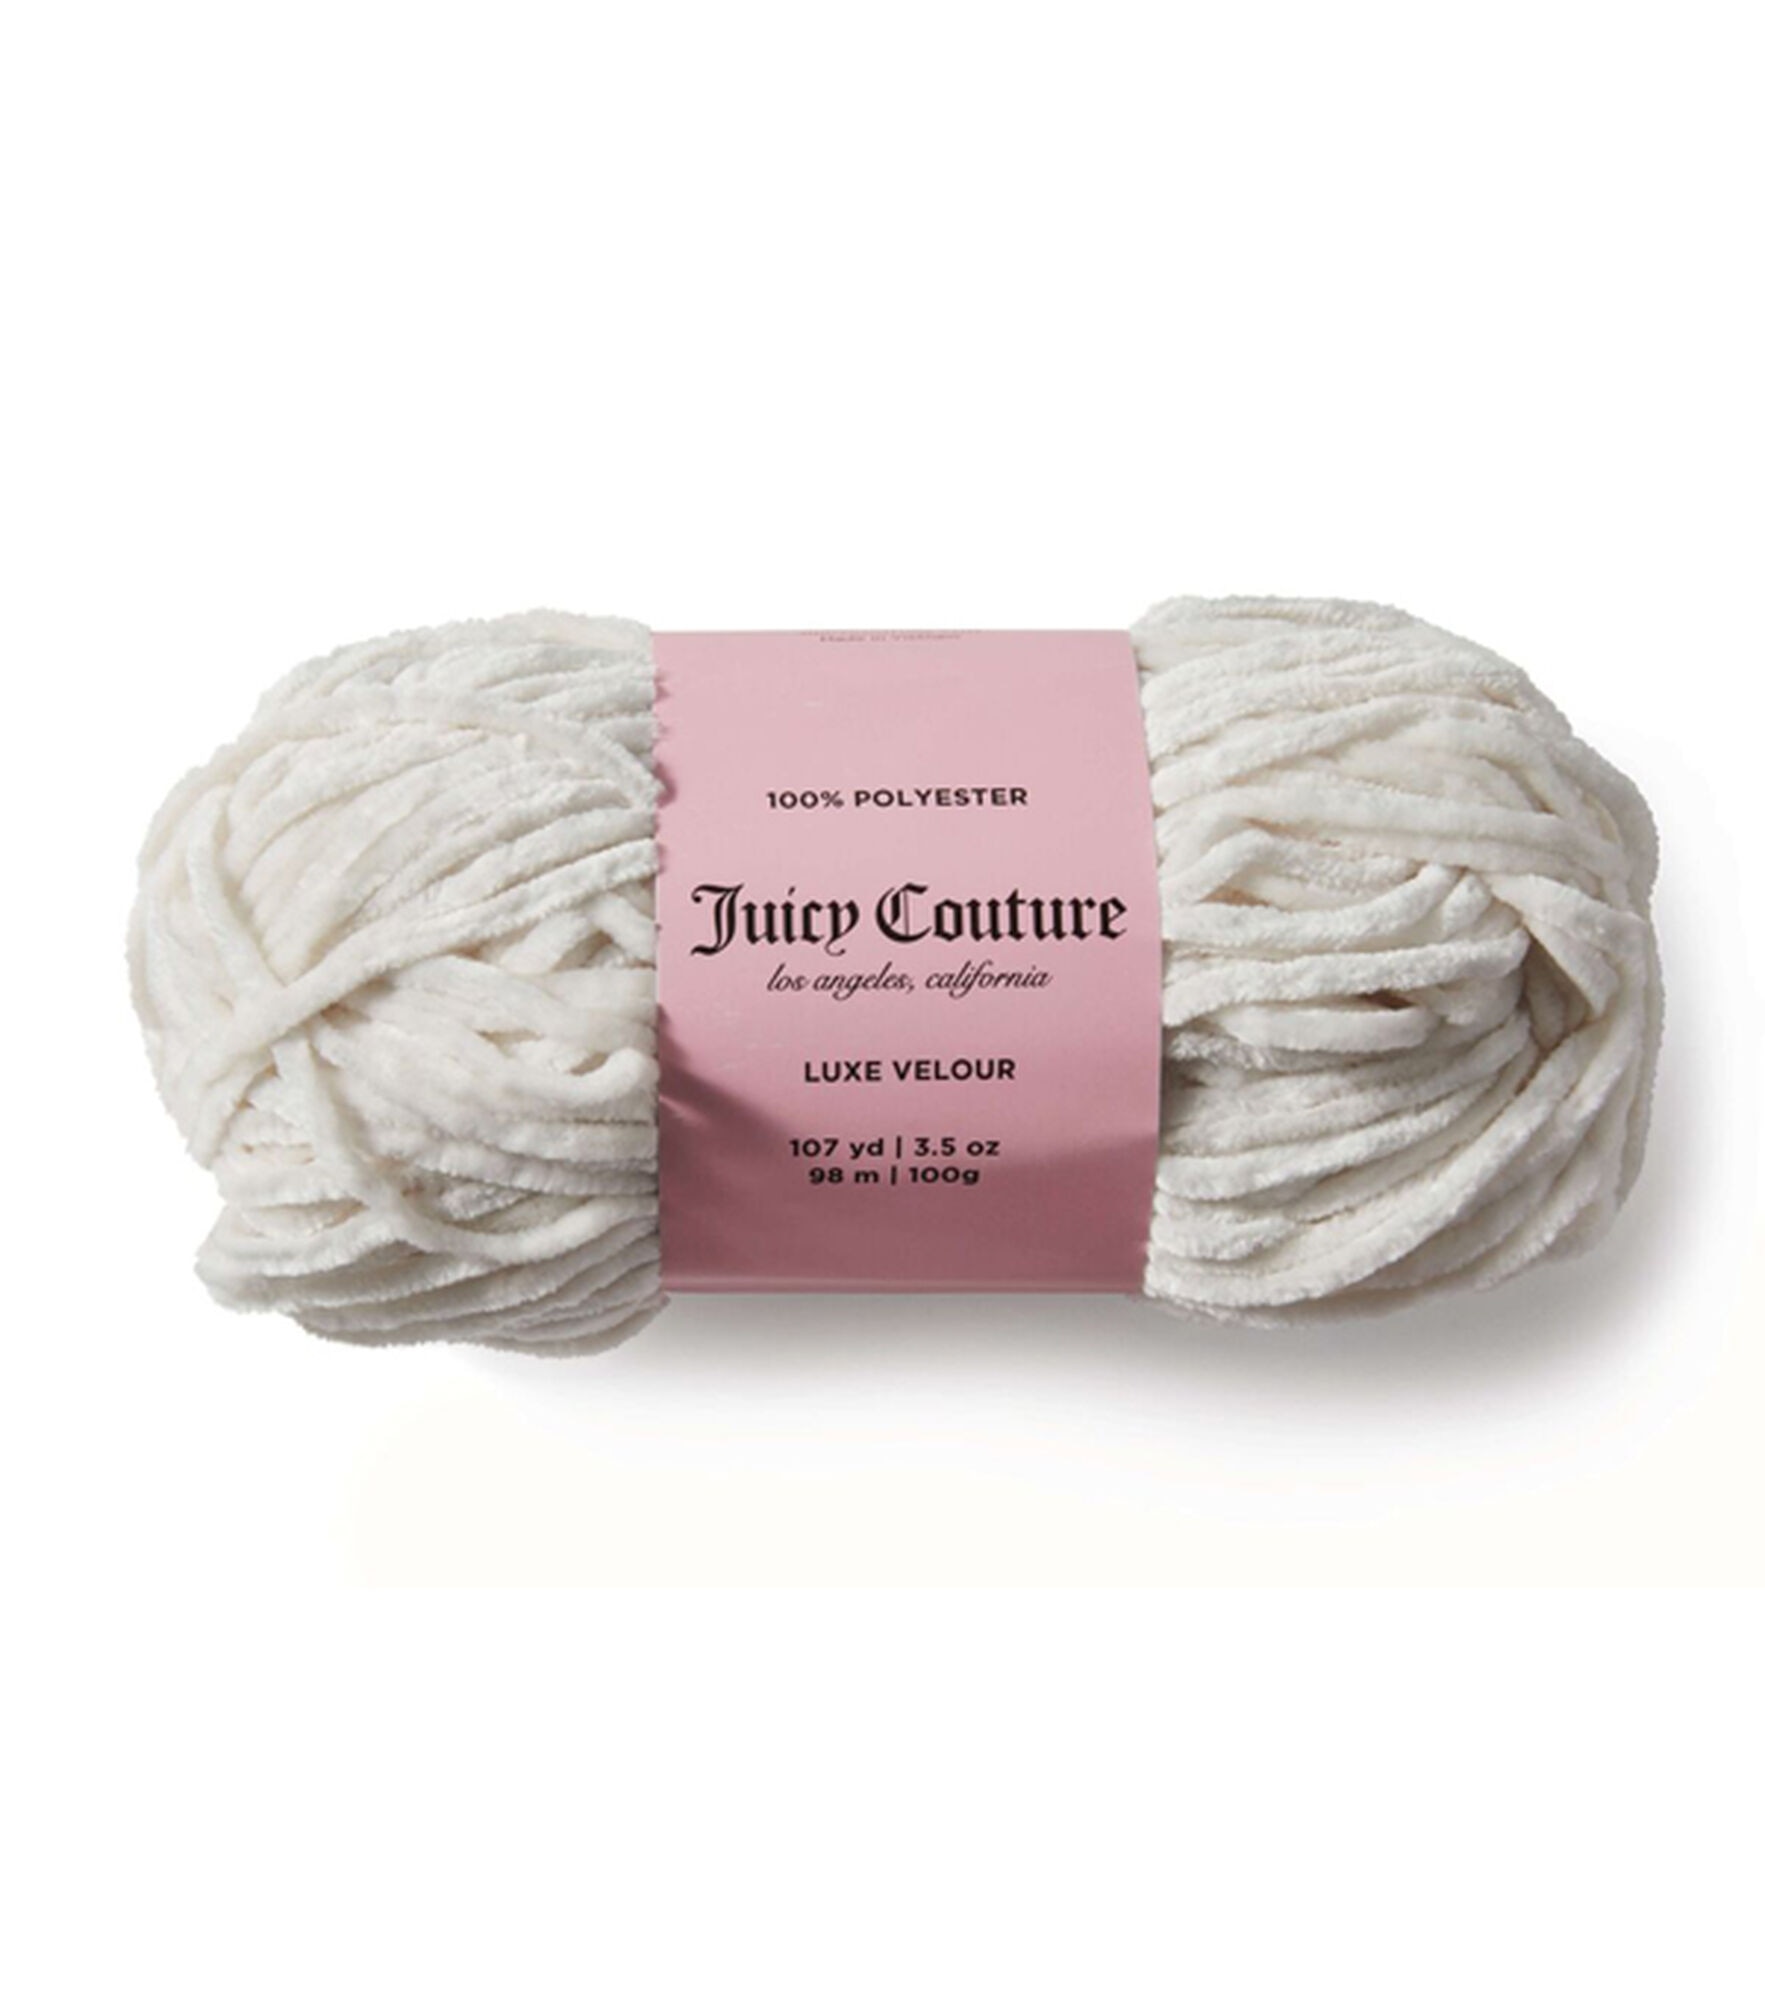 Juicy Couture Luxe Velour 107yds Bulky Polyester Yarn, Angel, hi-res